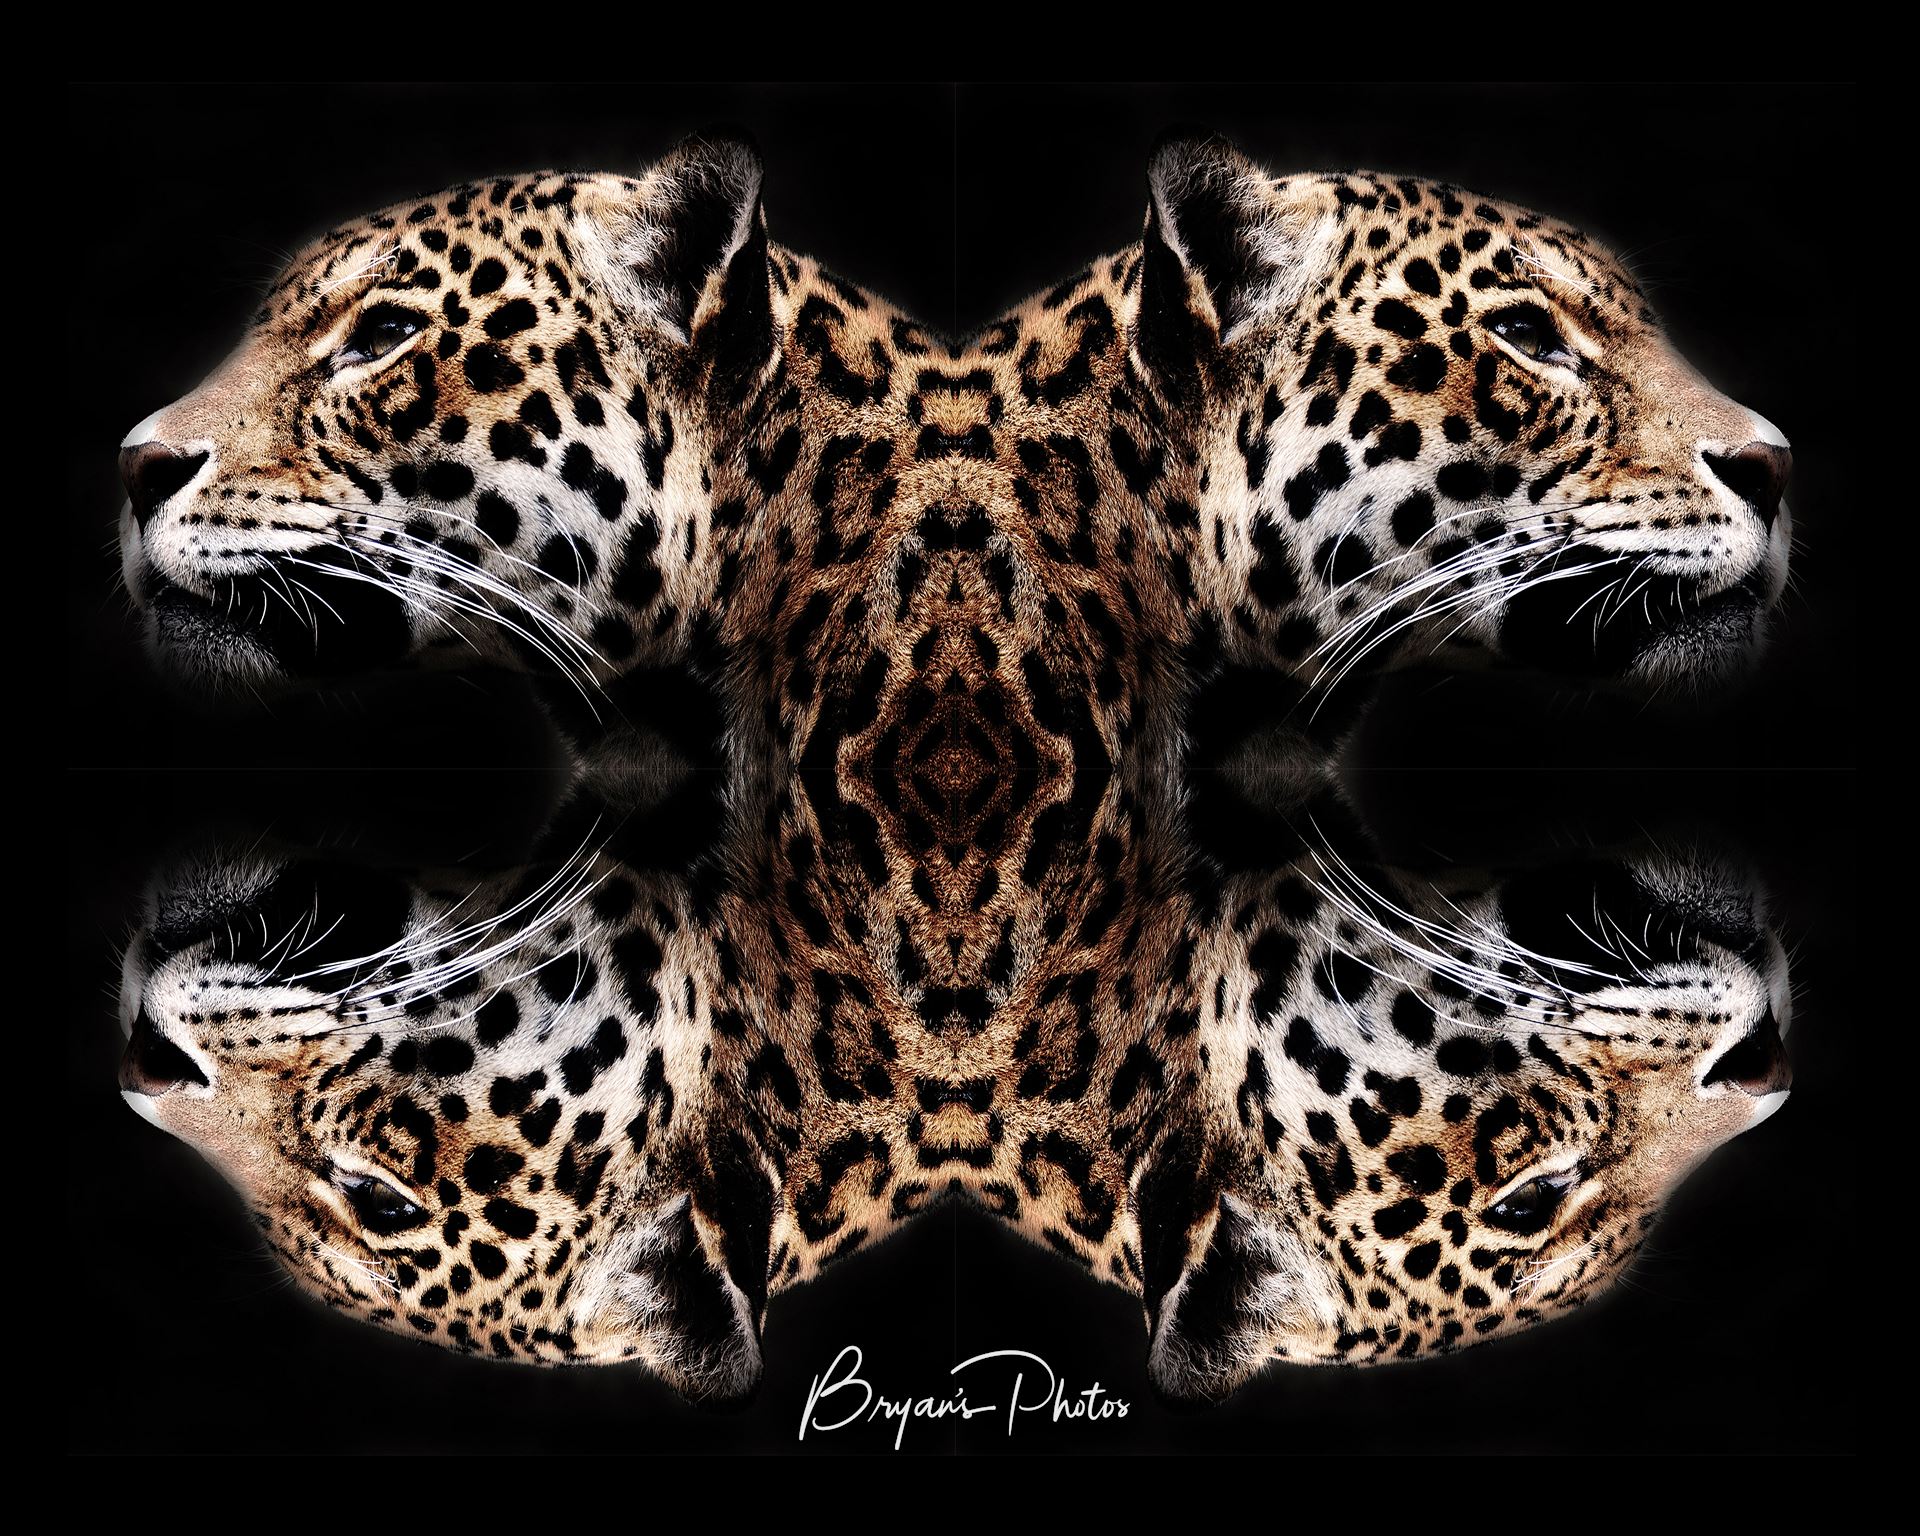 Jaguar art An image of a jaguars head mirrored and merged into wall art by Bryans Photos